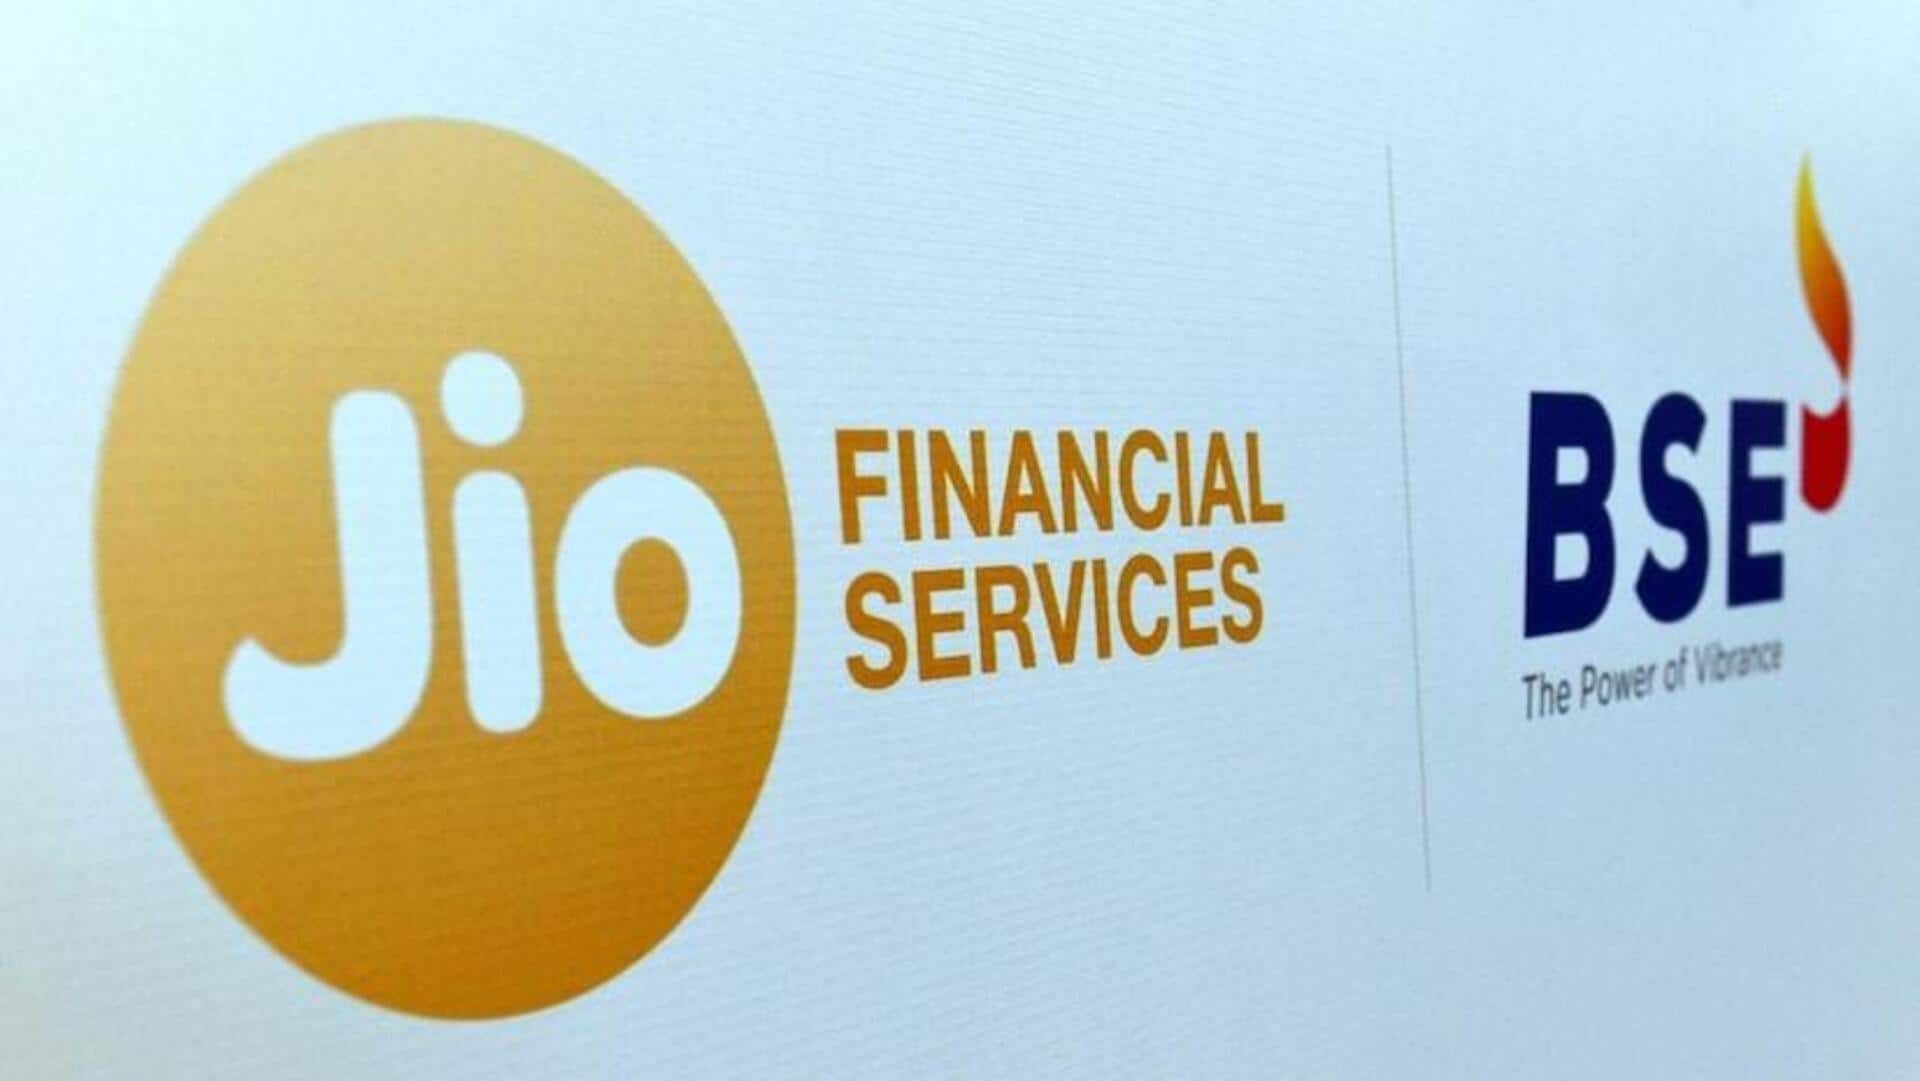 Jio Financial Services removed from BSE indices: What happens next